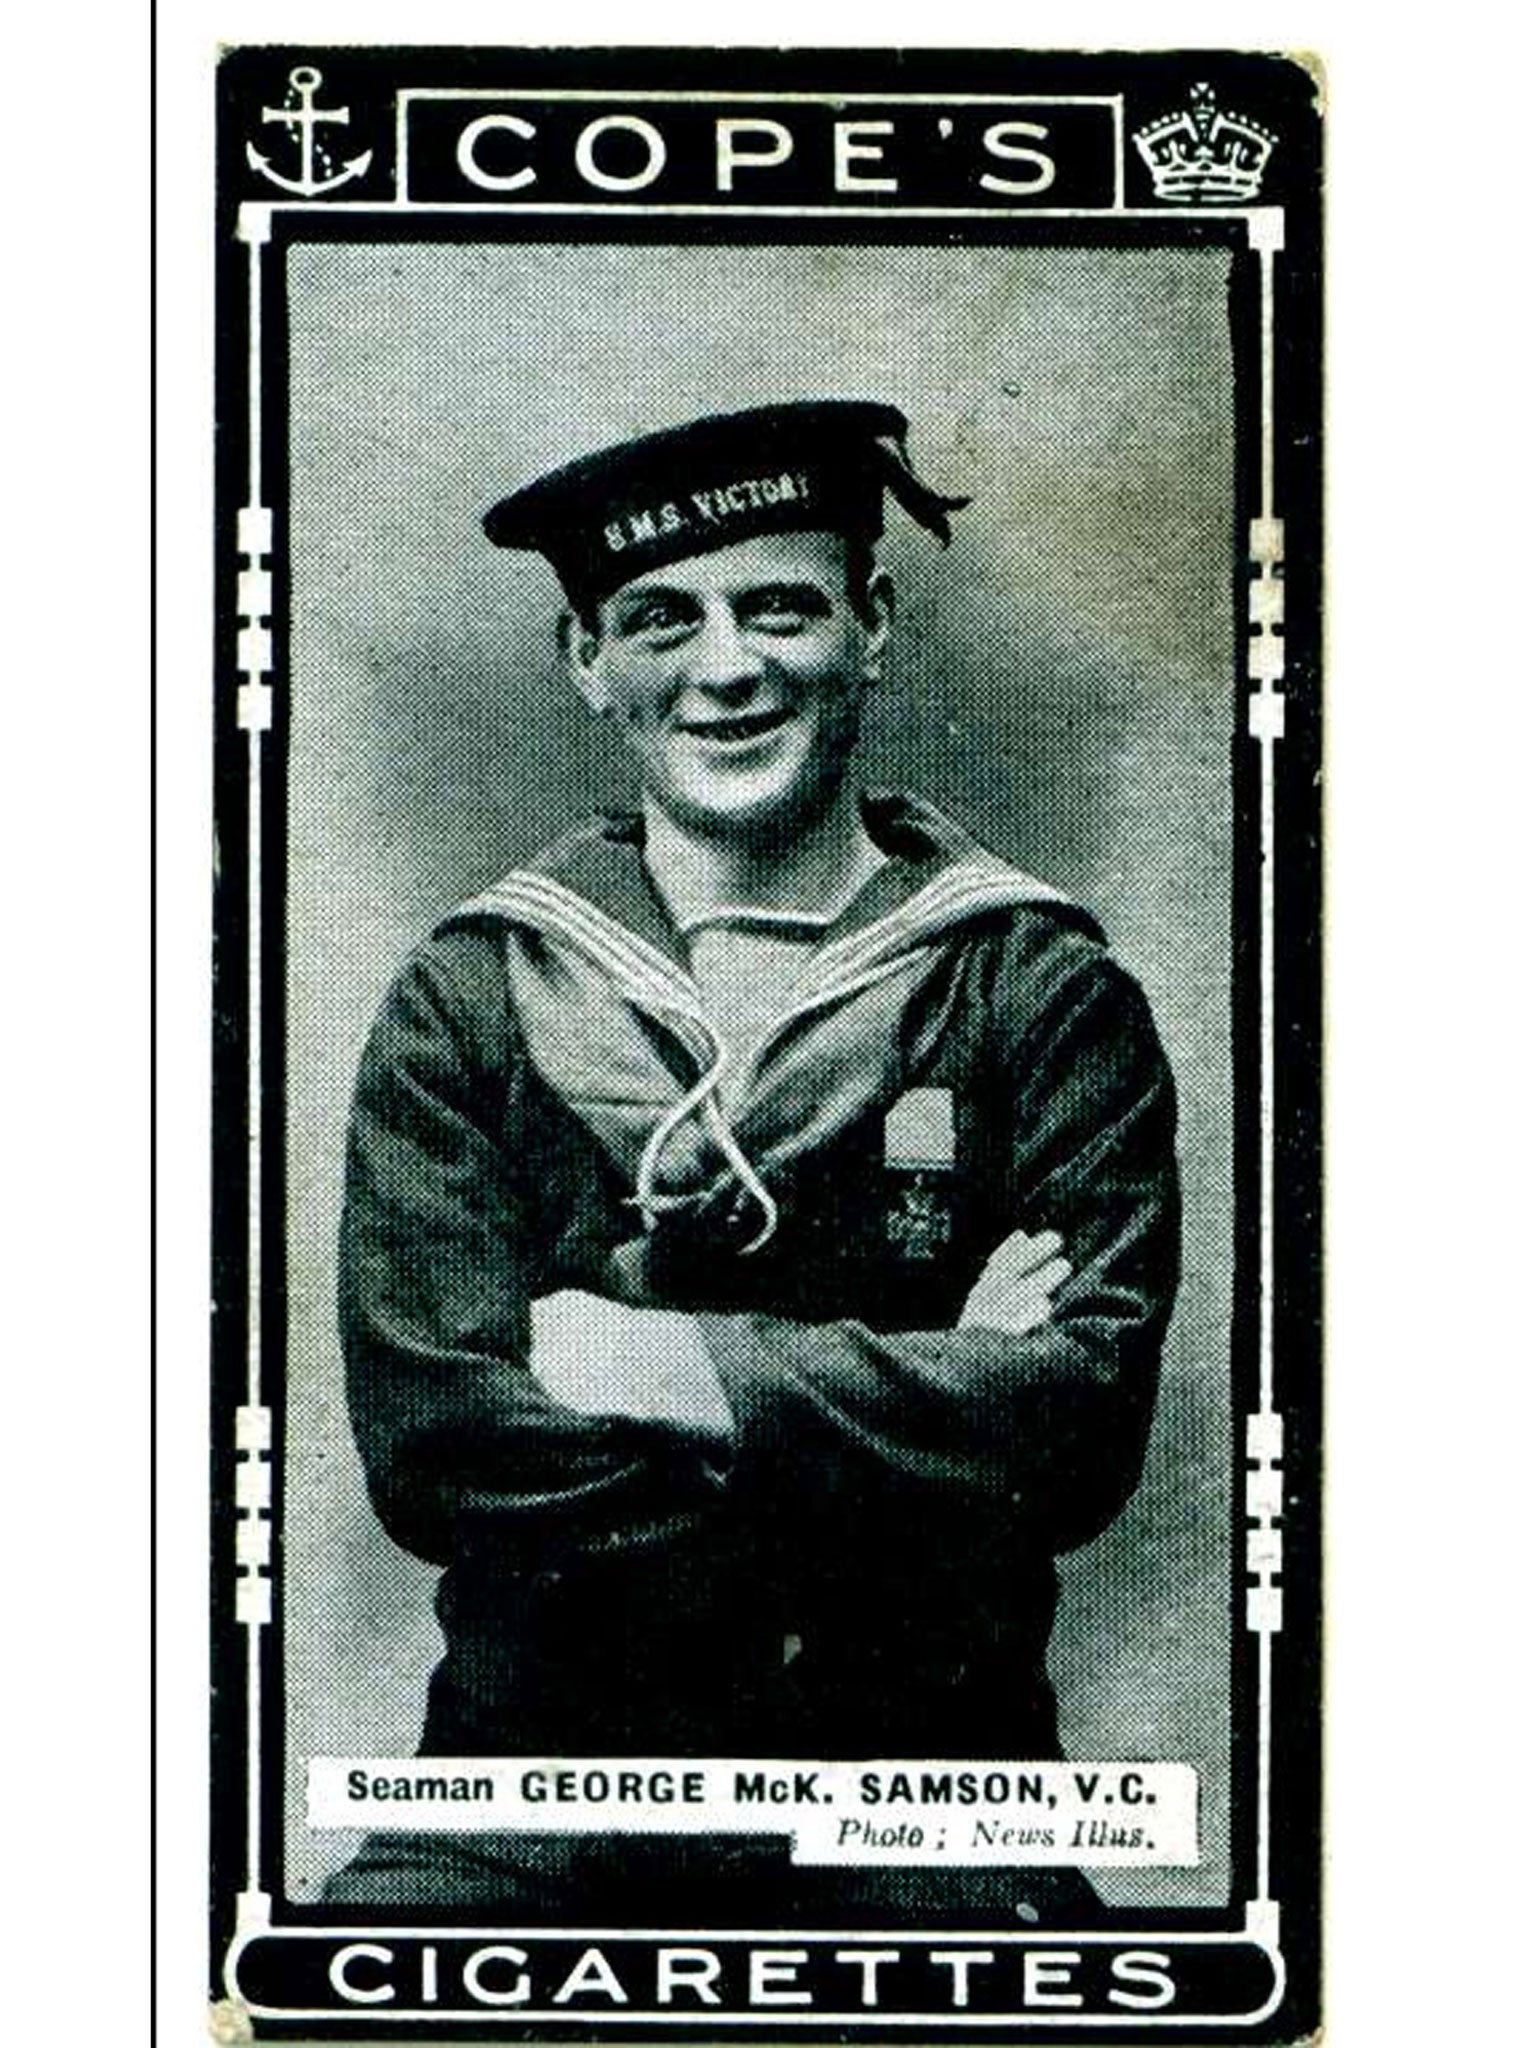 George Samson is celebrated on a cigarette card of the time